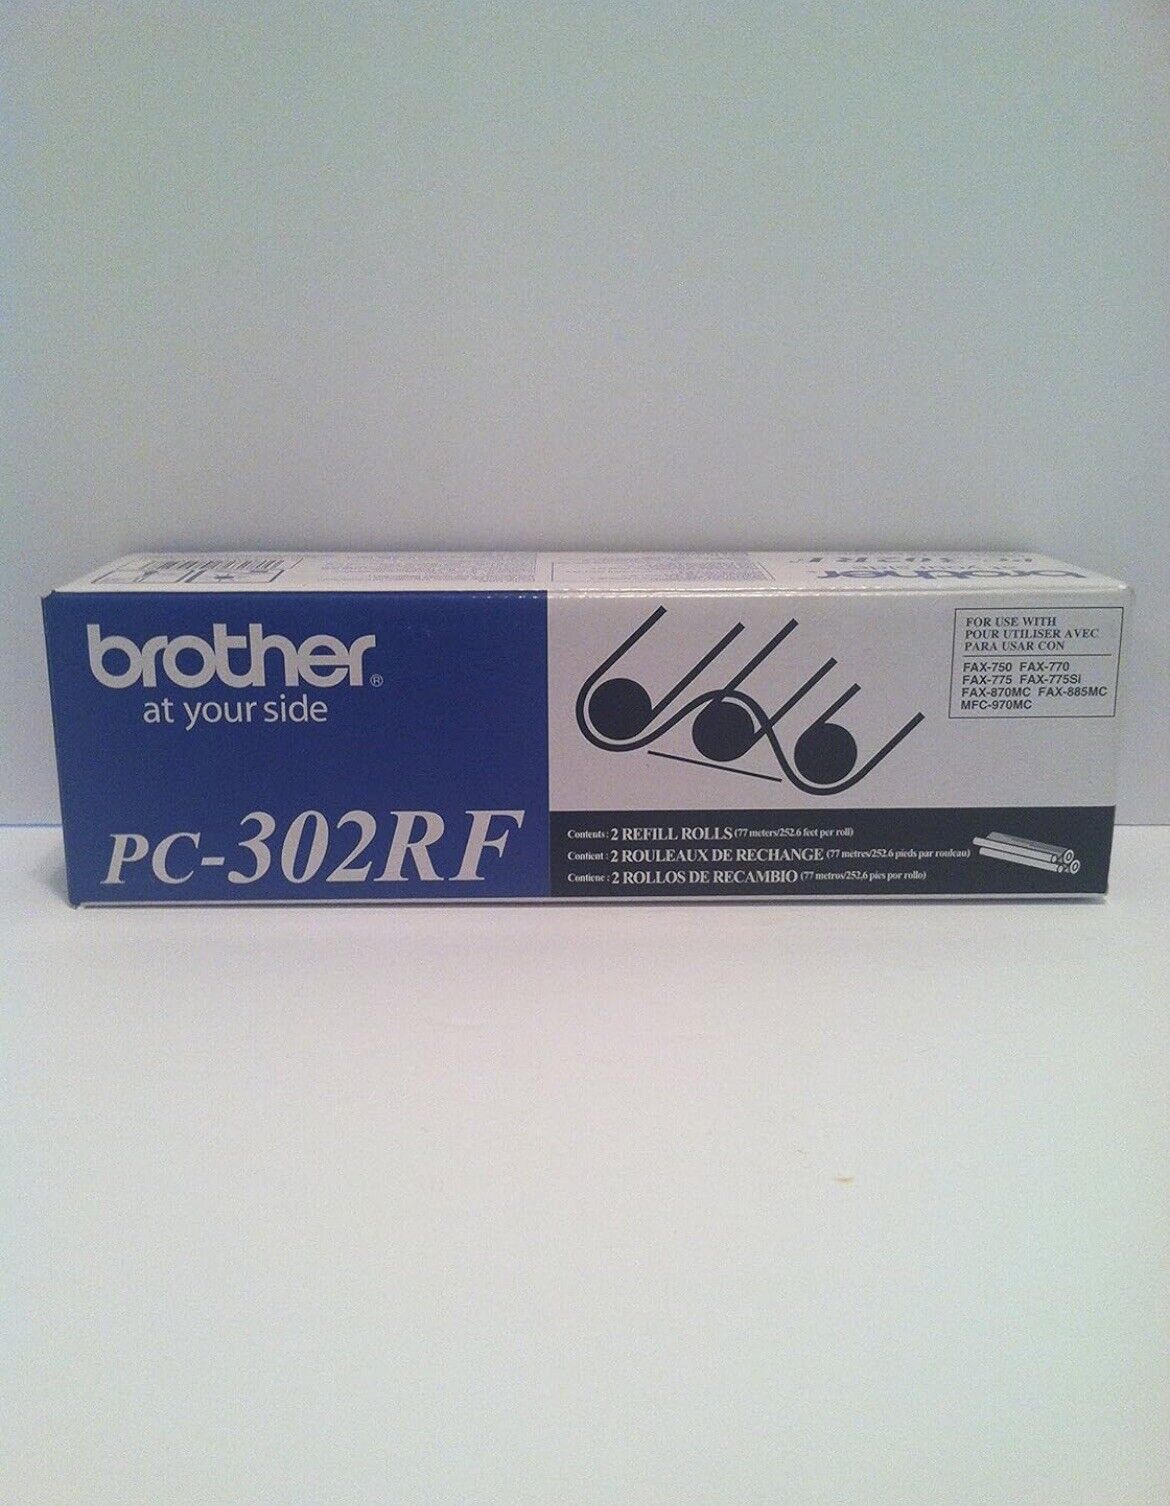 Brother PC-302RF Refill Rolls Fax Machine New in Box Sealed